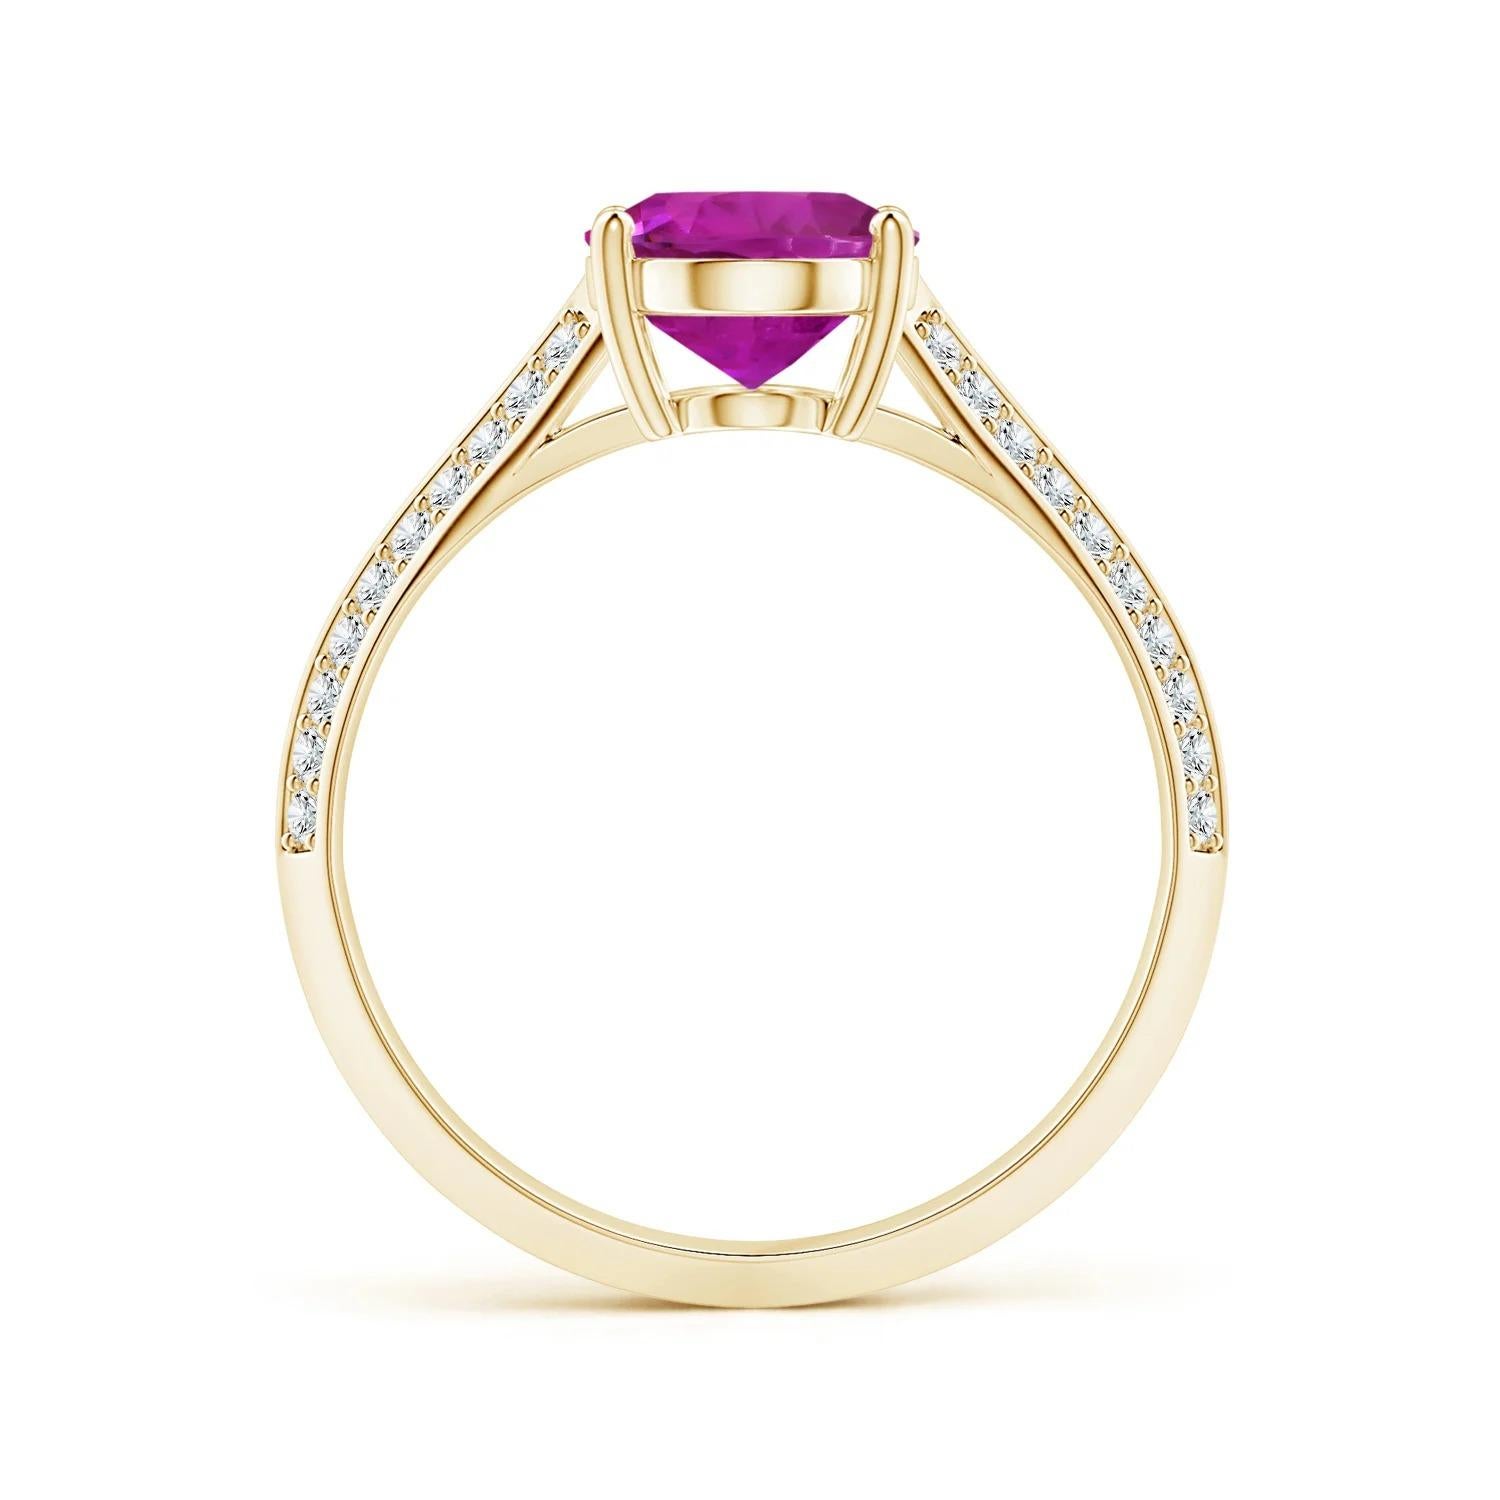 For Sale:  Angara Gia Certified Pink Sapphire Knife Edge Ring in Yellow Gold with Diamonds 2